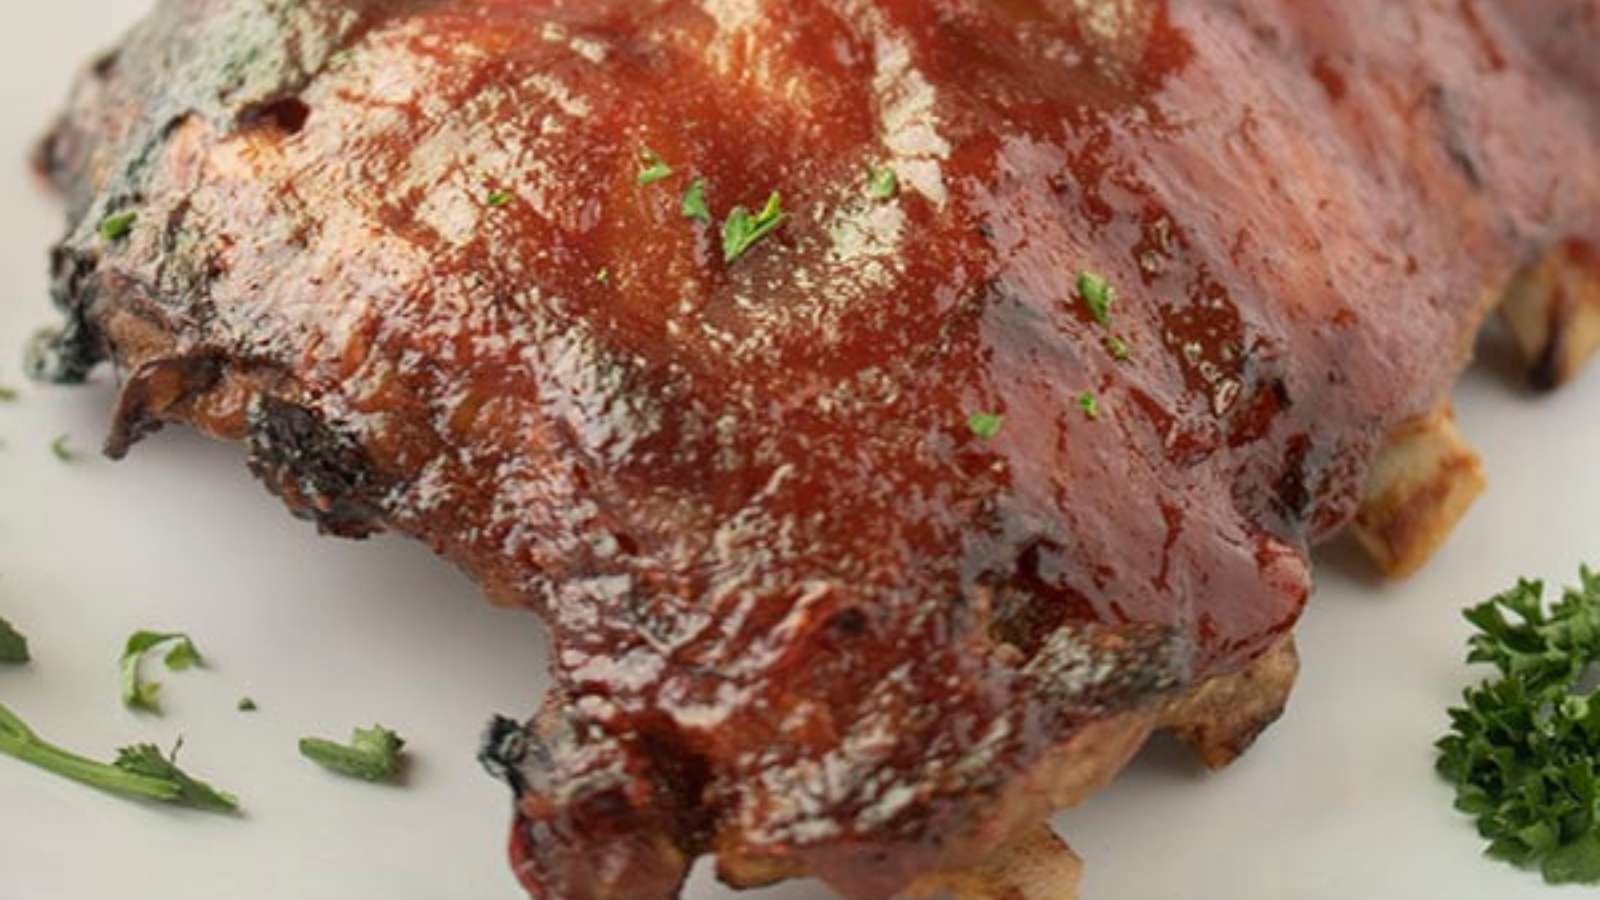 Bbq ribs on a white plate.